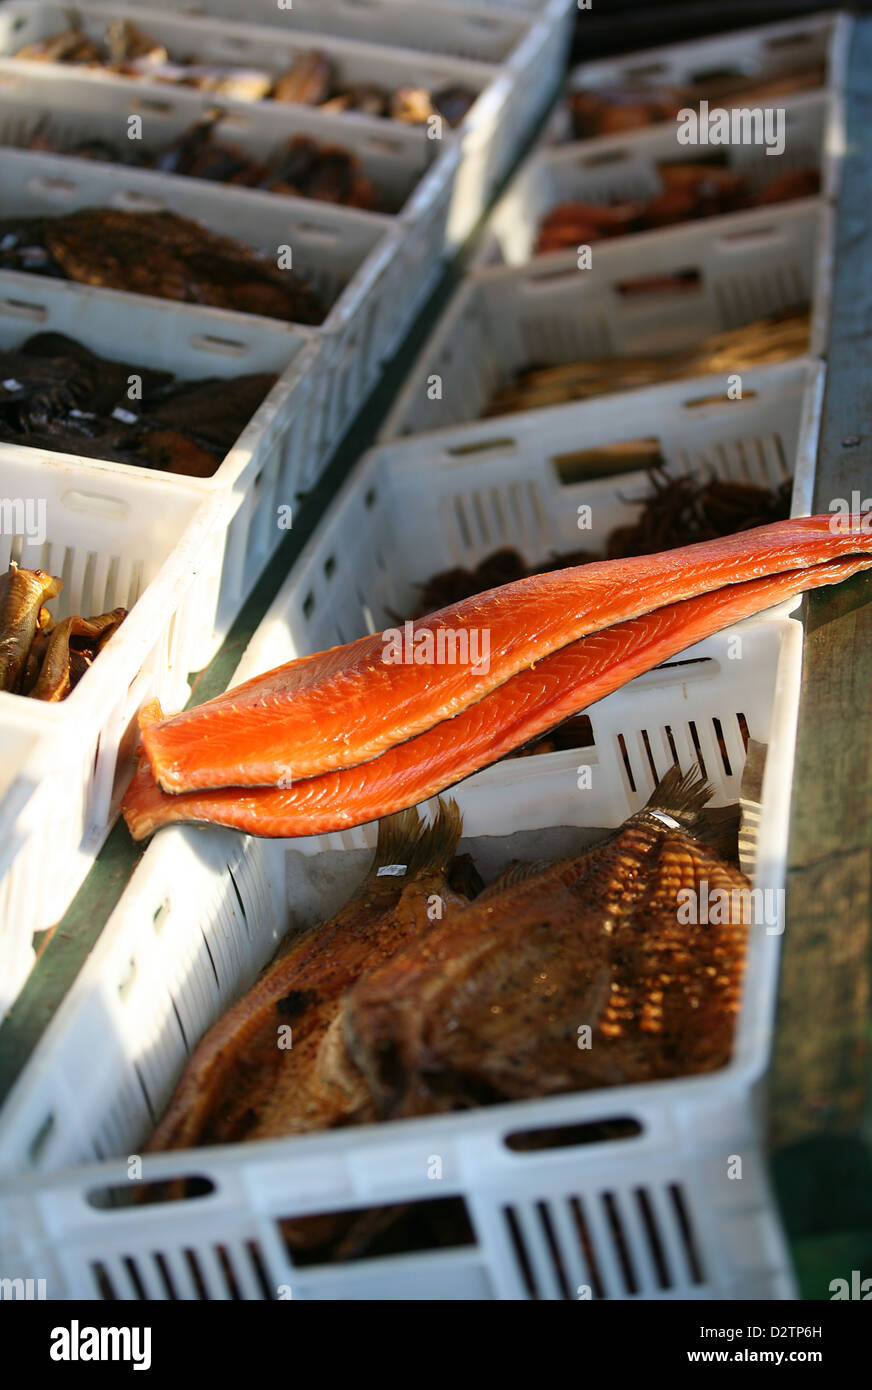 Fillet of a red smoked fish Stock Photo